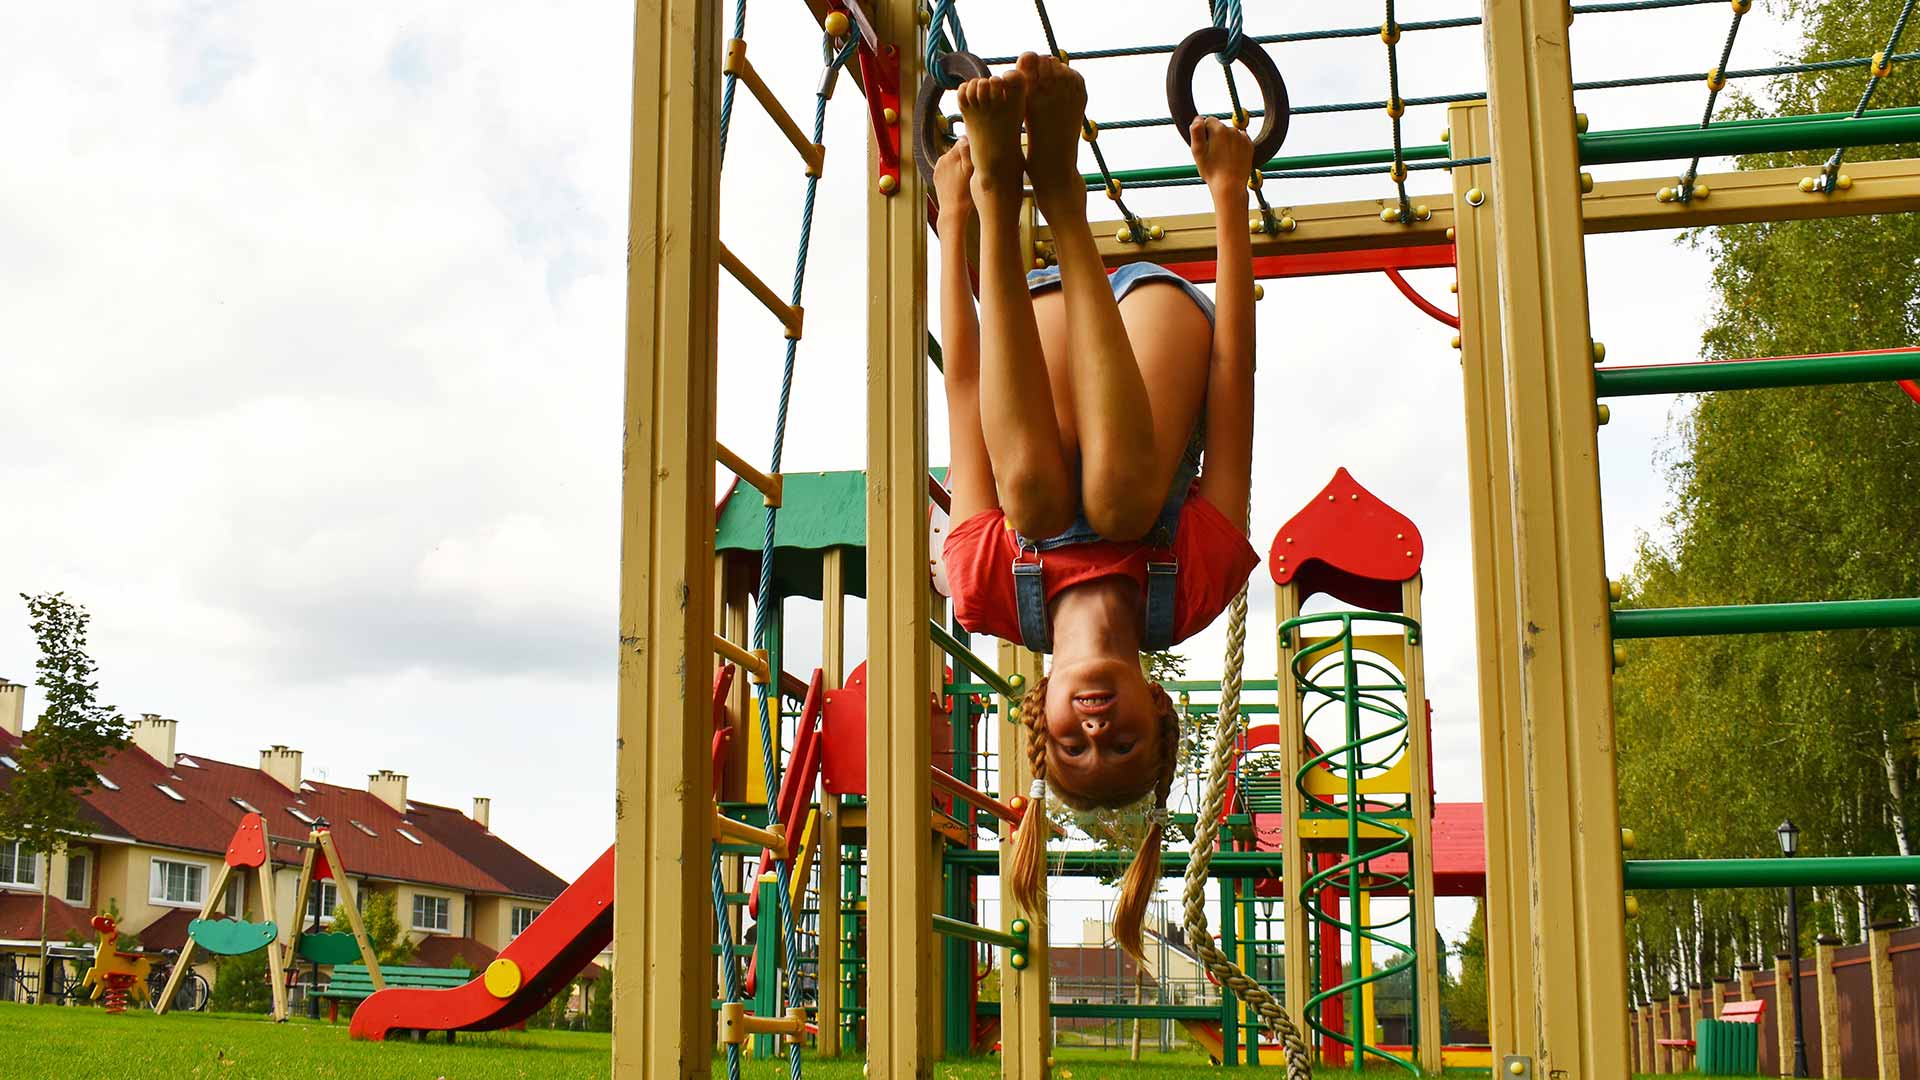 Girl hanging upside down on the playground